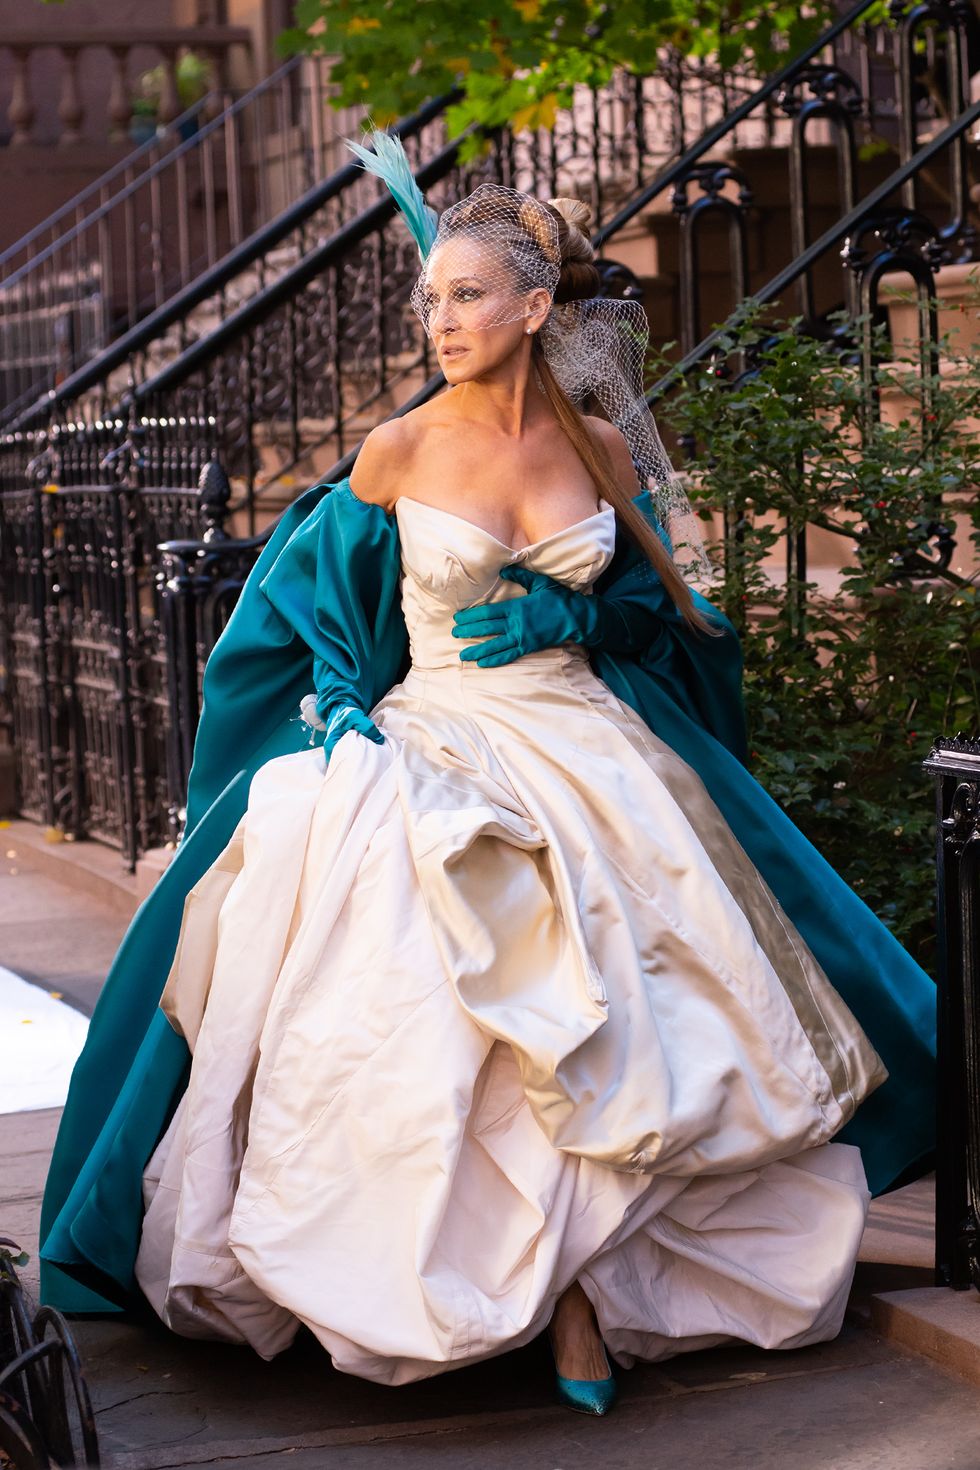 Sarah Jessica Parker rewears Carrie's Vivienne Westwood wedding dress in  'And Just Like That